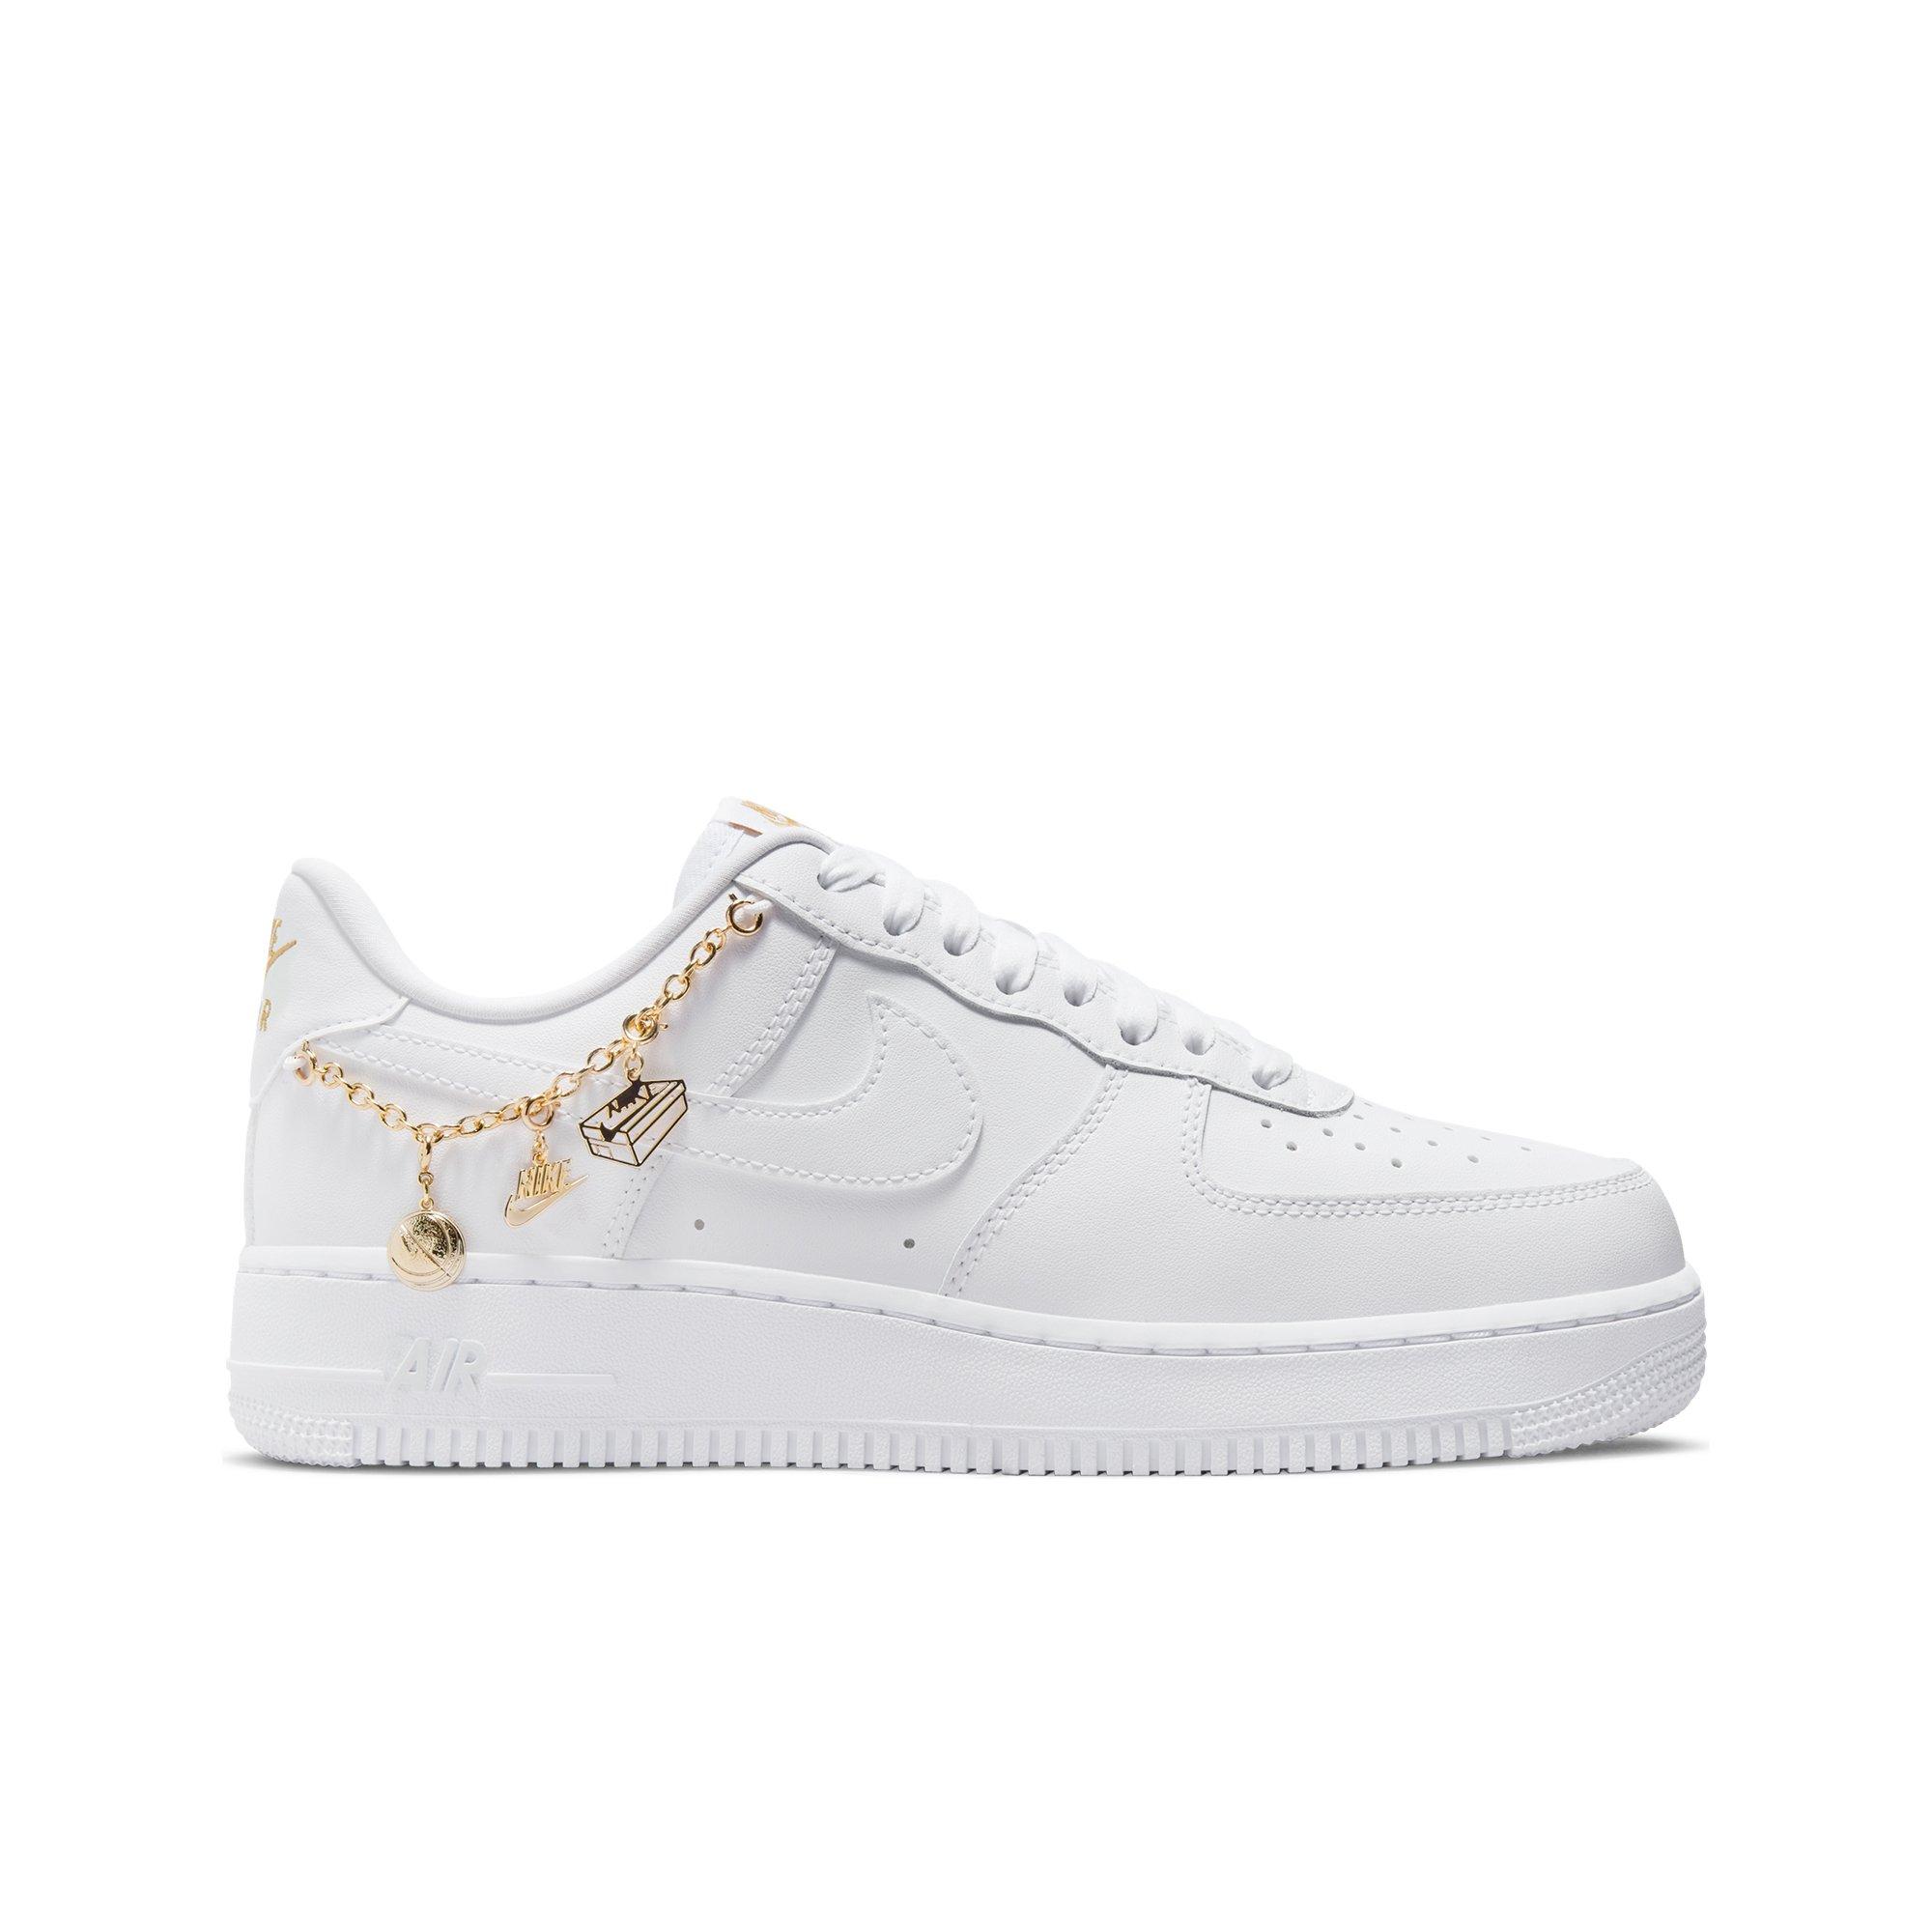 LV x Nike Air Force 1 07 Mid White Metallic Gold IA9V8Z -  MultiscaleconsultingShops - nike air yeezy authentic for sale free trial  2016